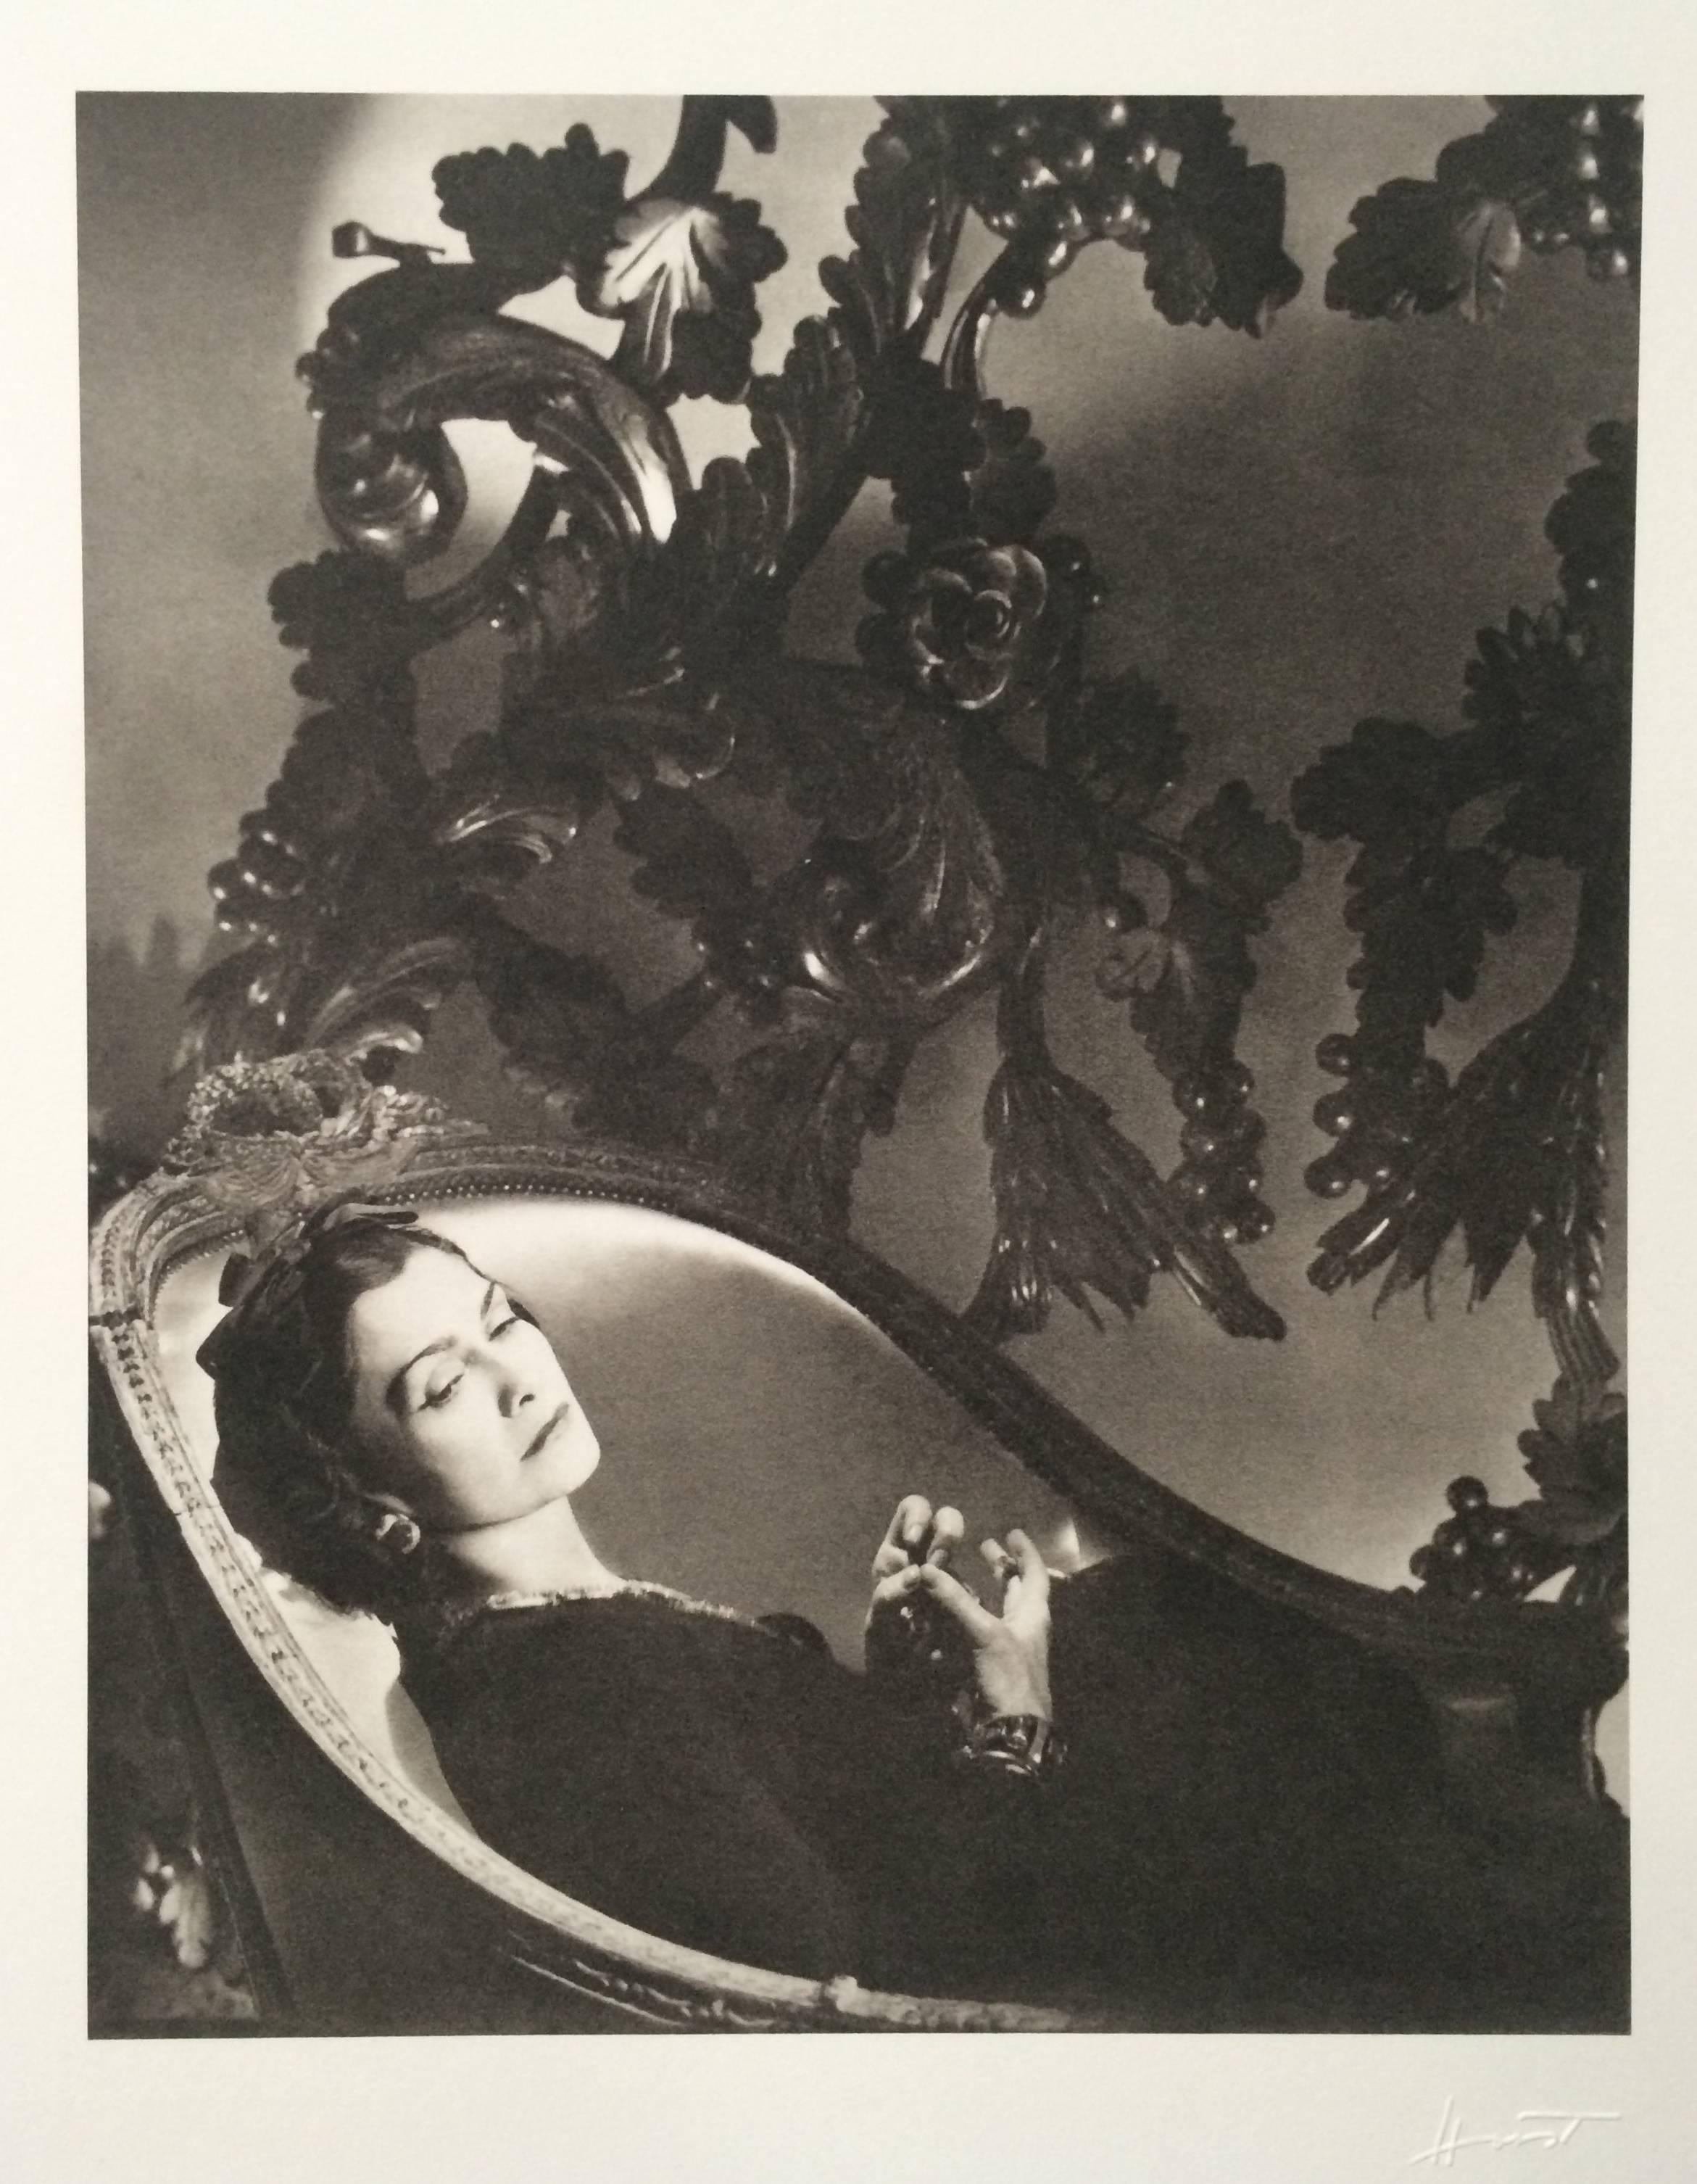 Horst P. Horst Black and White Photograph - Coco Chanel, II, Paris